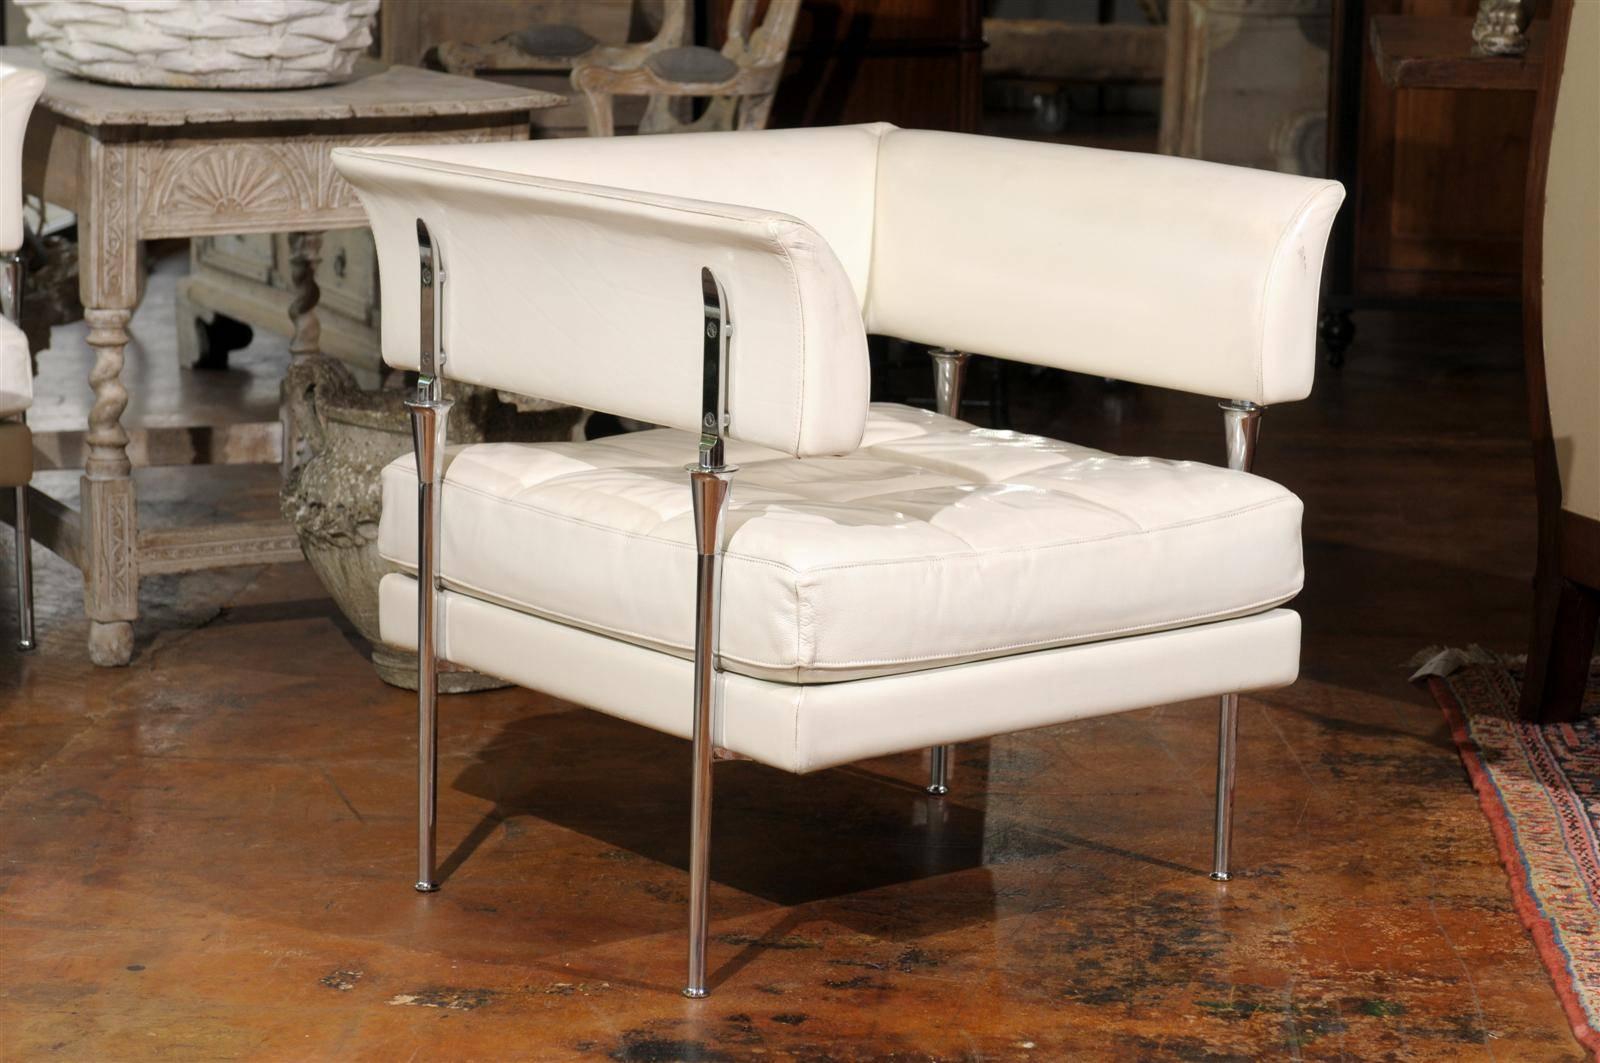 This pair of Italian Hydra Castor armchairs were designed by renowned artist Luca Scacchetti in 1992 for Poltrona Frau, the famed Italian furniture firm. The chairs are upholstered in a high quality white Pelle leather. The wrap-around backs and